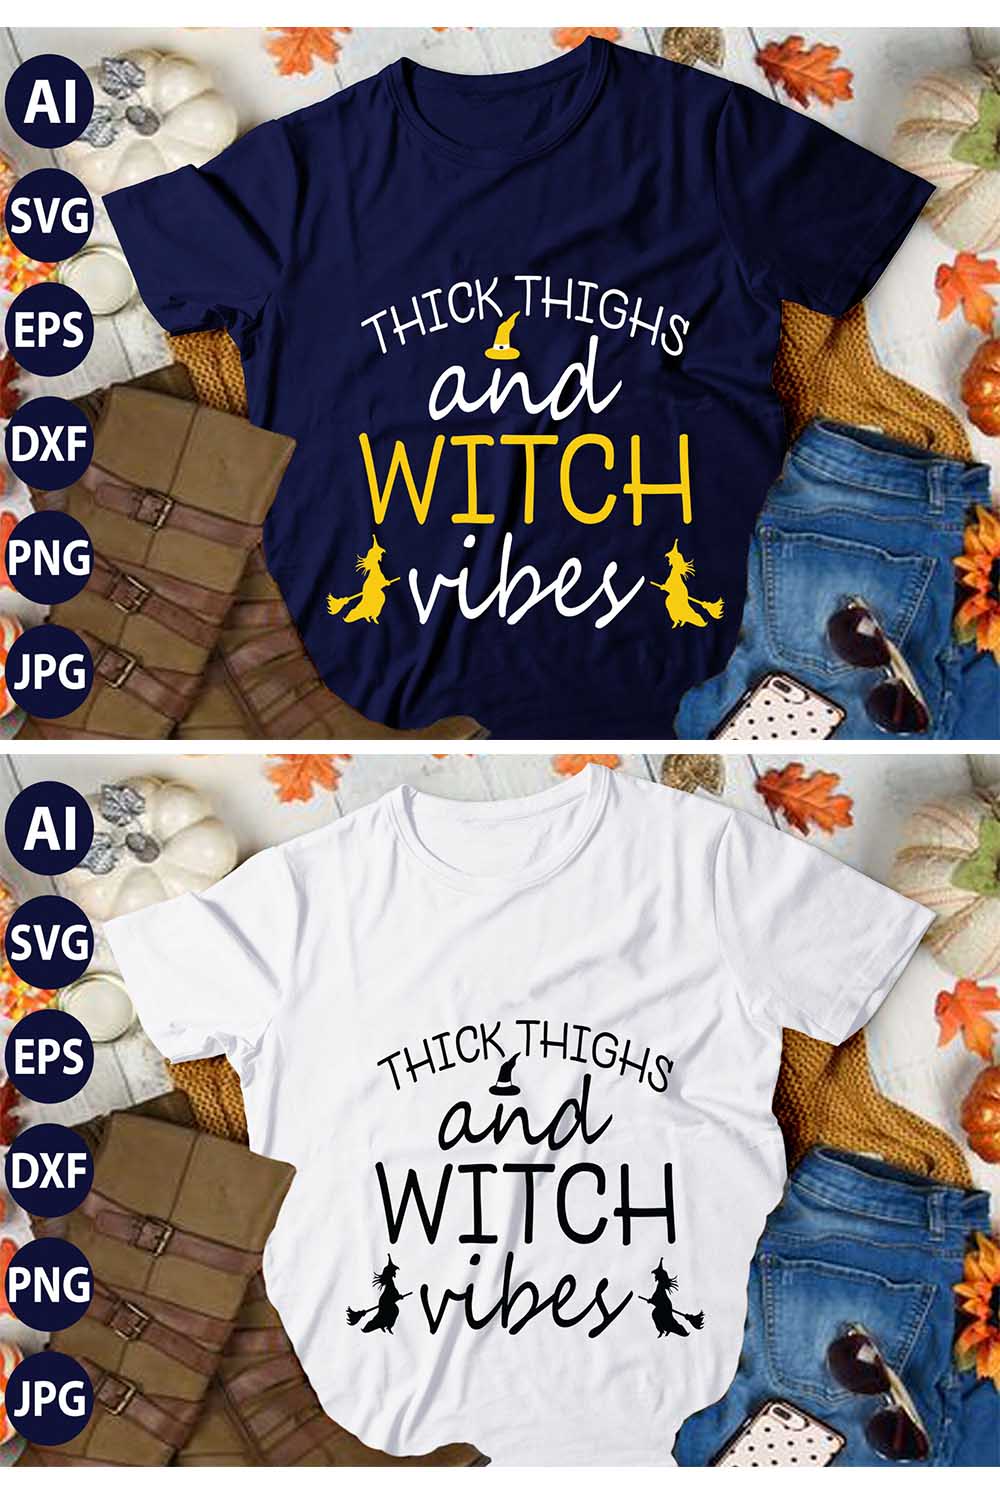 Thick Thighs And Witch Vibes, SVG T-Shirt Design |Happy Halloween & Pumpkin T-Shirt Design | Ai, Svg, Eps, Dxf, Jpeg, Png, Instant download T-Shirt | 100% print-ready Digital vector file pinterest preview image.